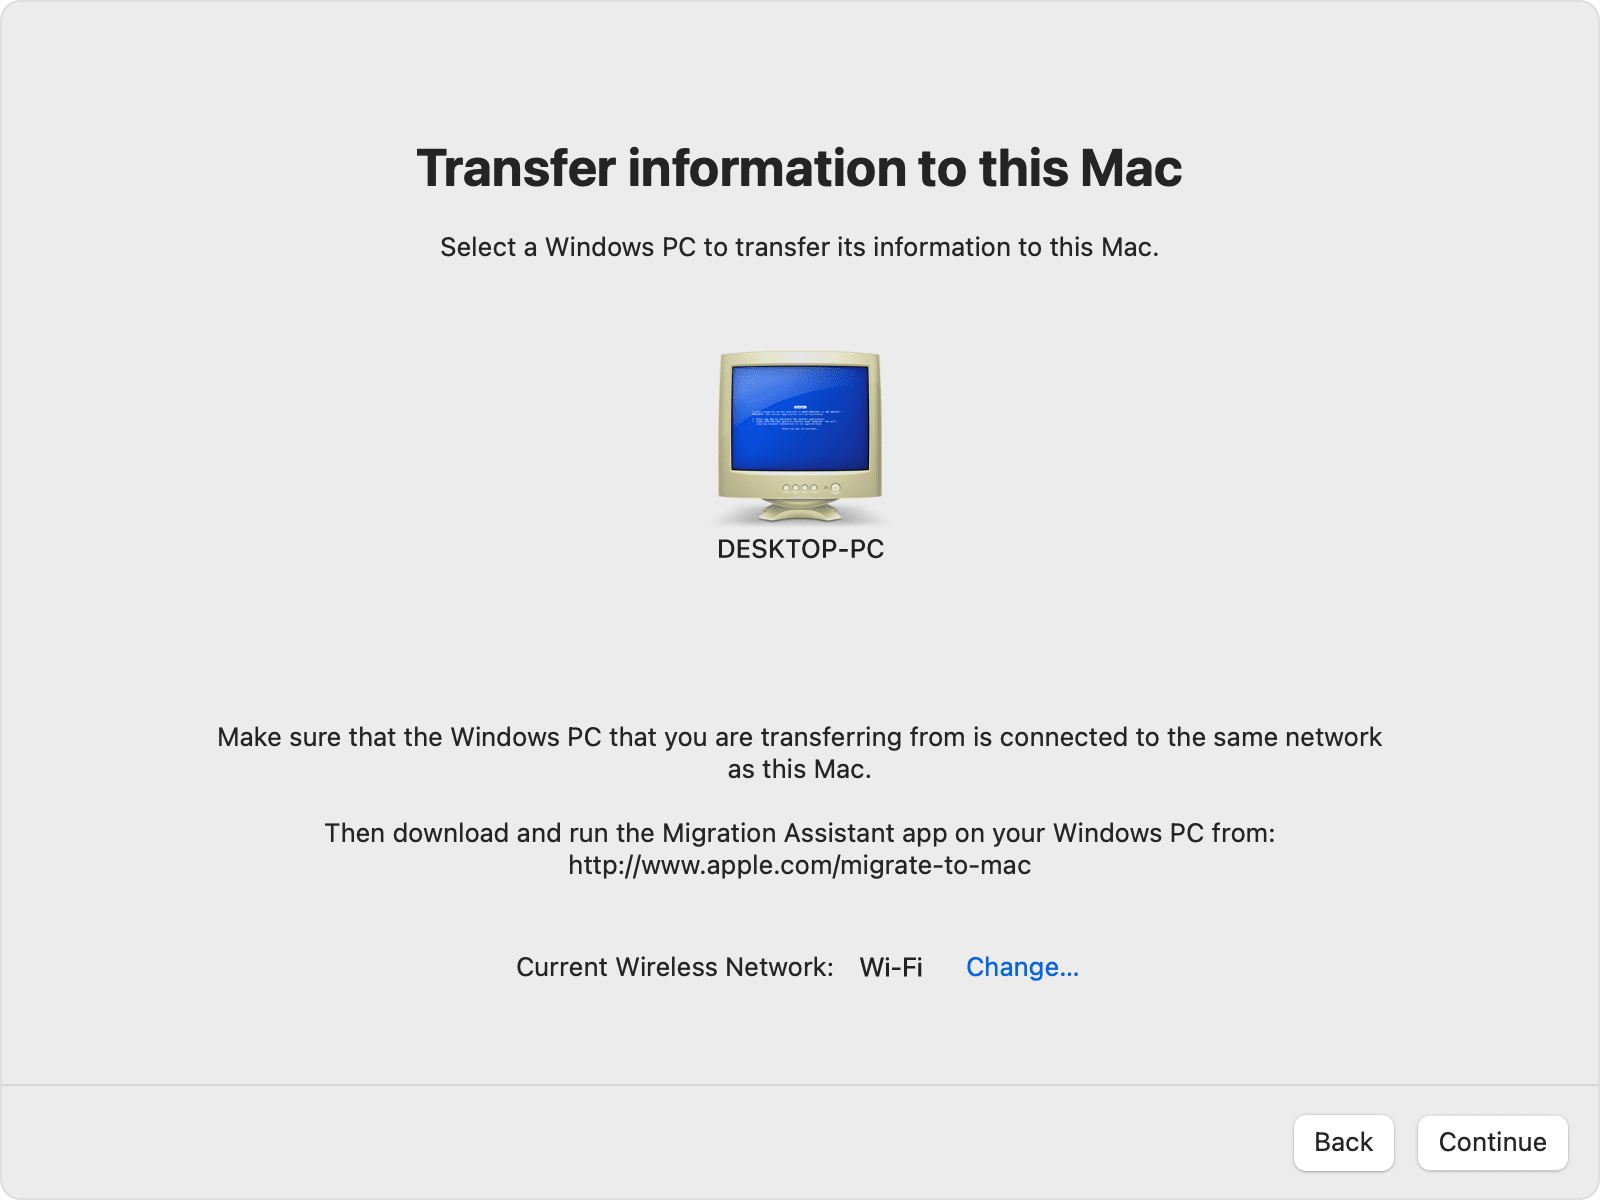 Migration Assistant on PC: Transfer information to this Mac